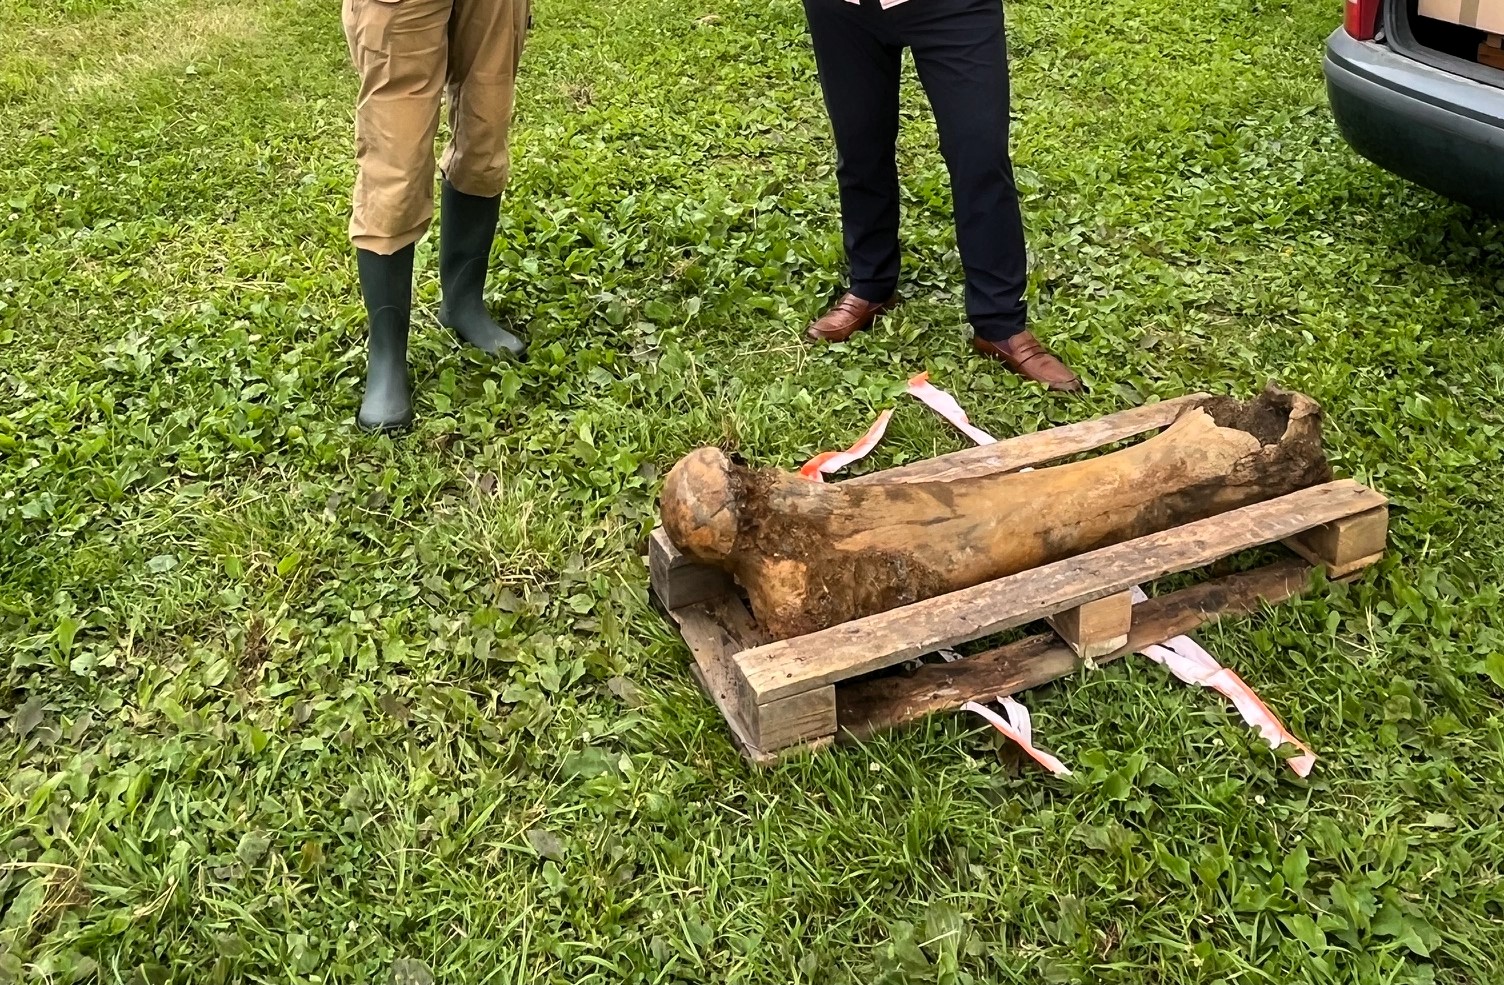 Angler in Poland discovers Ice Age mammoth bone while fishing at the Raba River. Experts confirm the find, dating back to the Pleistocene epoch. Read more about this incredible discovery.